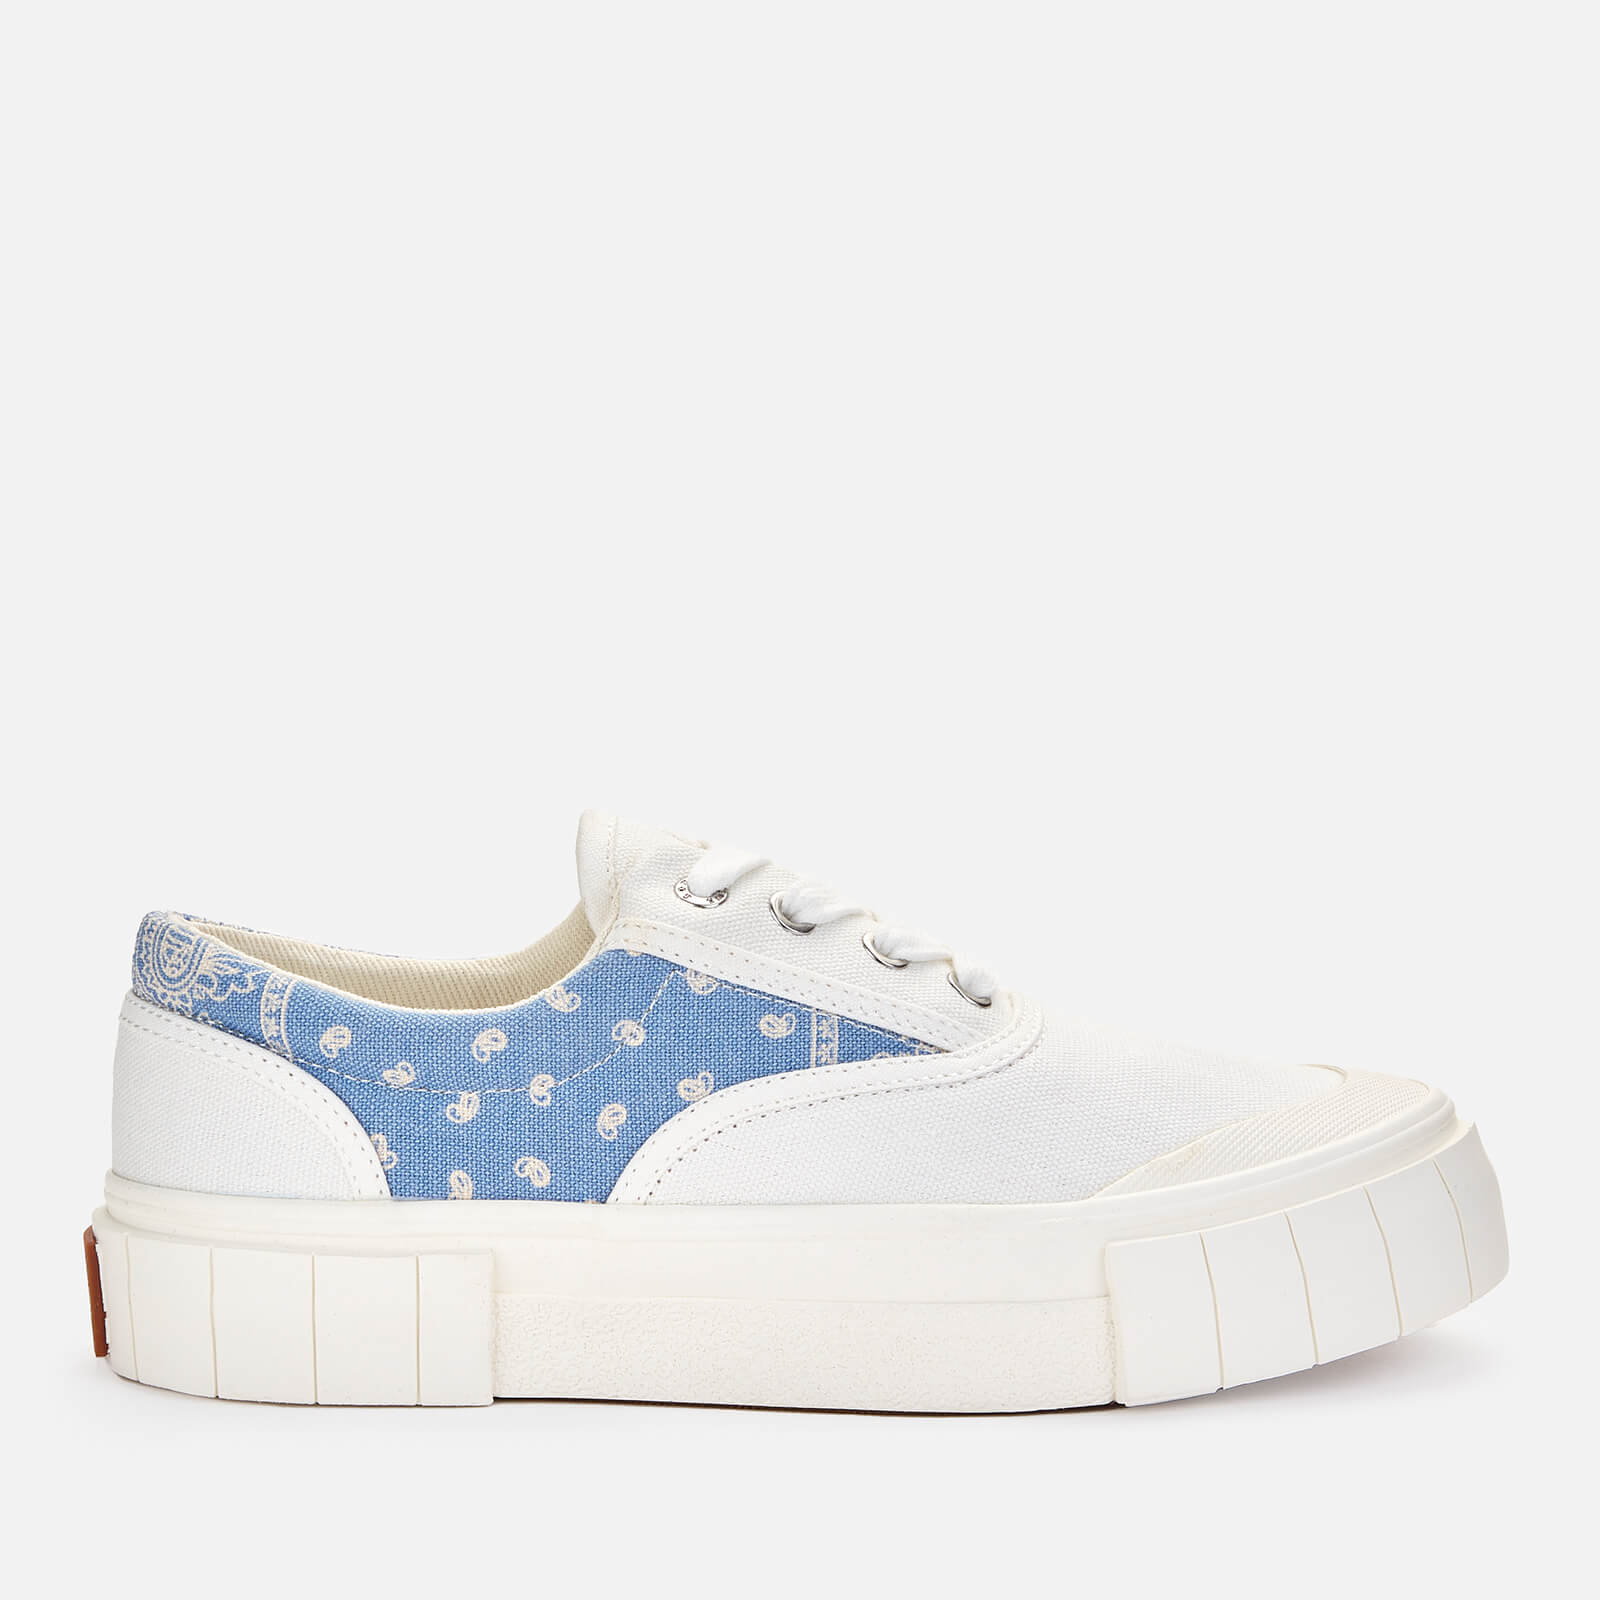 Good News Women's Paisley Opal Low Top Trainers - White/Blue - UK 4